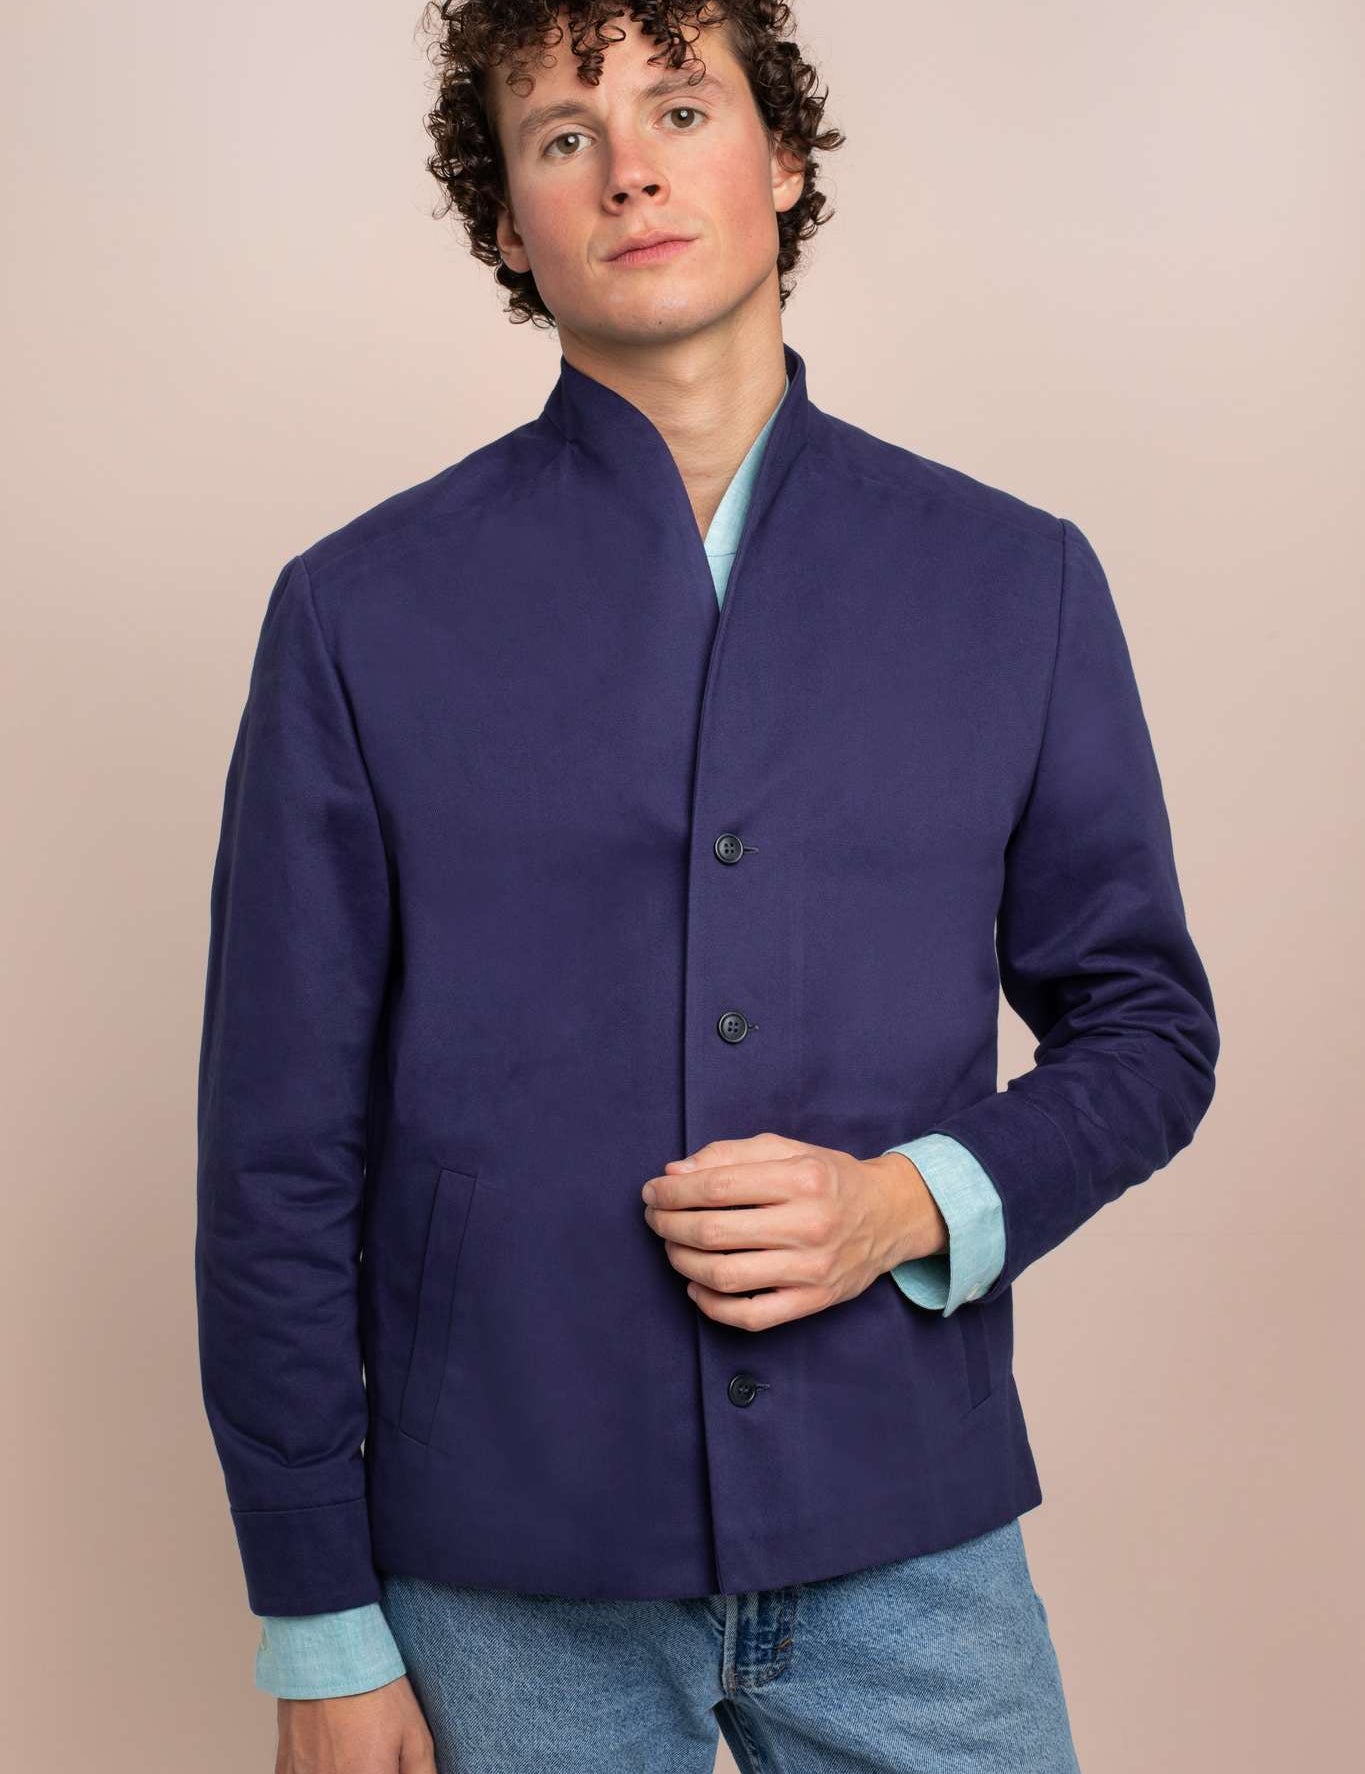 blue-elevato-casual-cotton-jacket-front-view.jpg